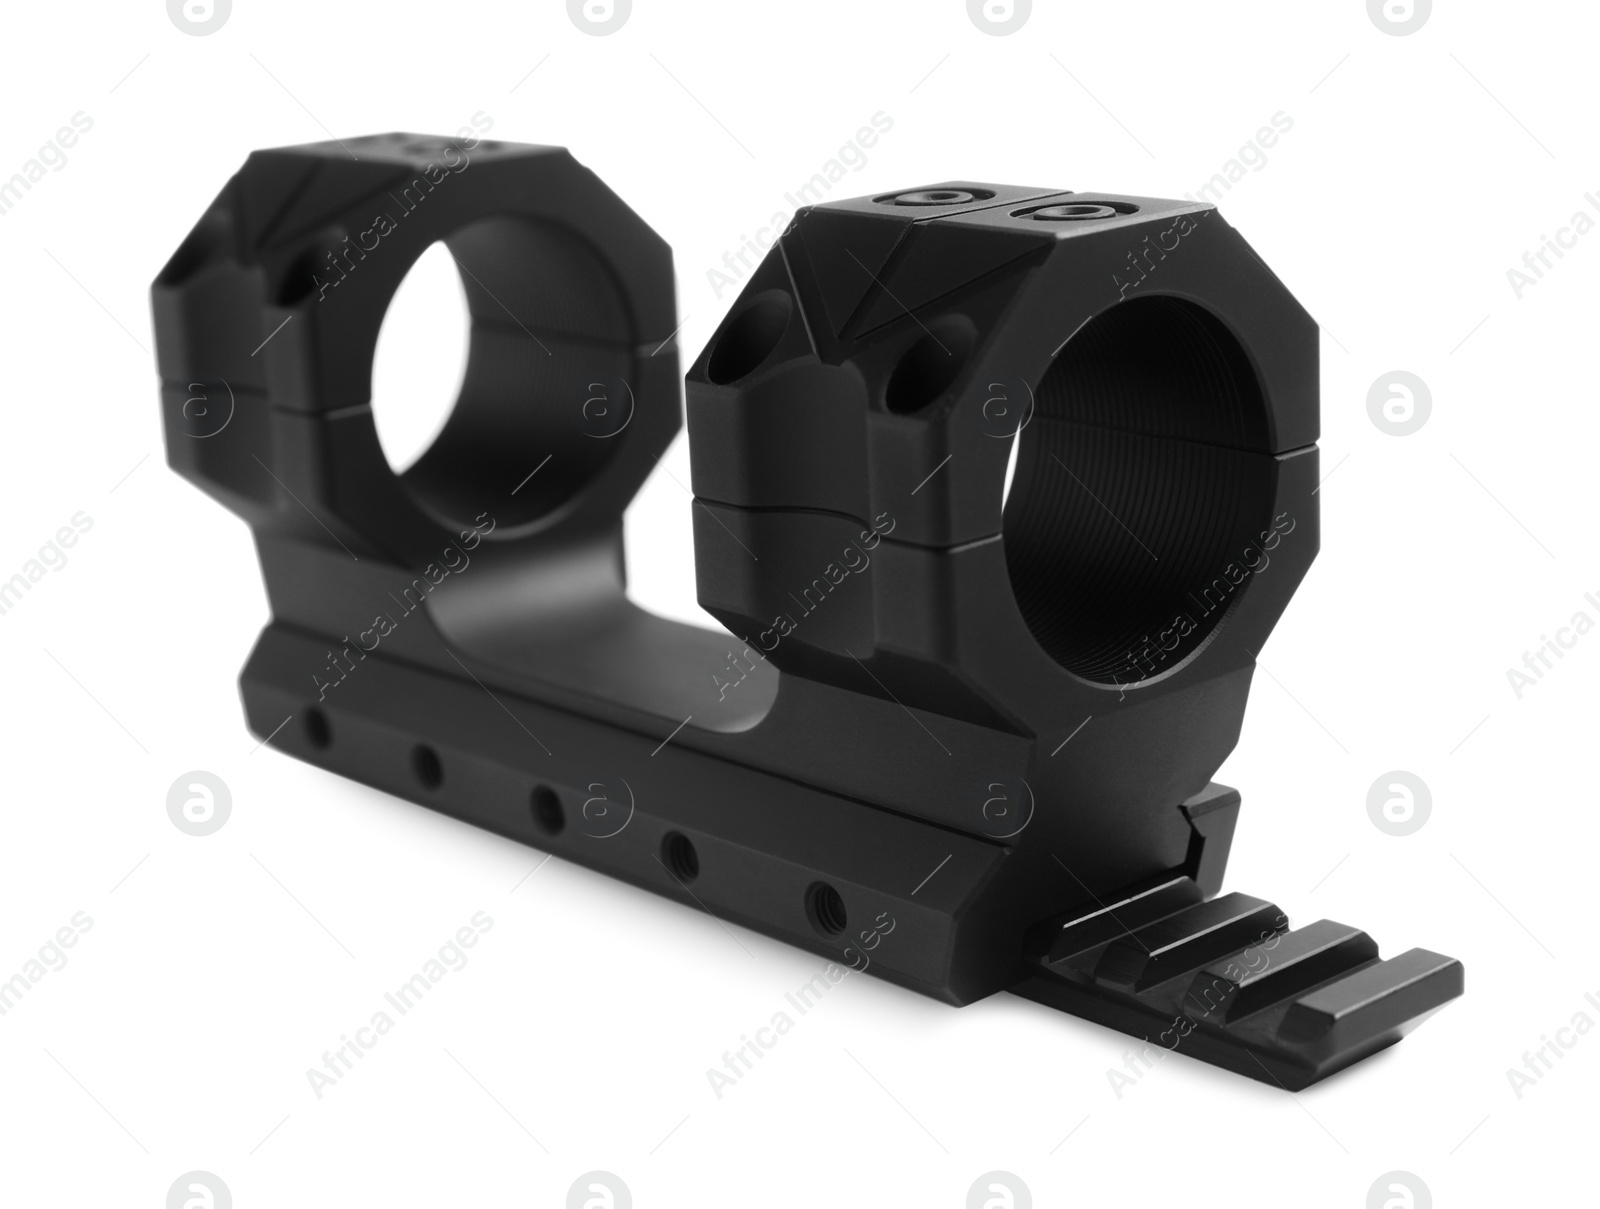 Photo of Quick disconnect sniper cantilever scope mount isolated on white